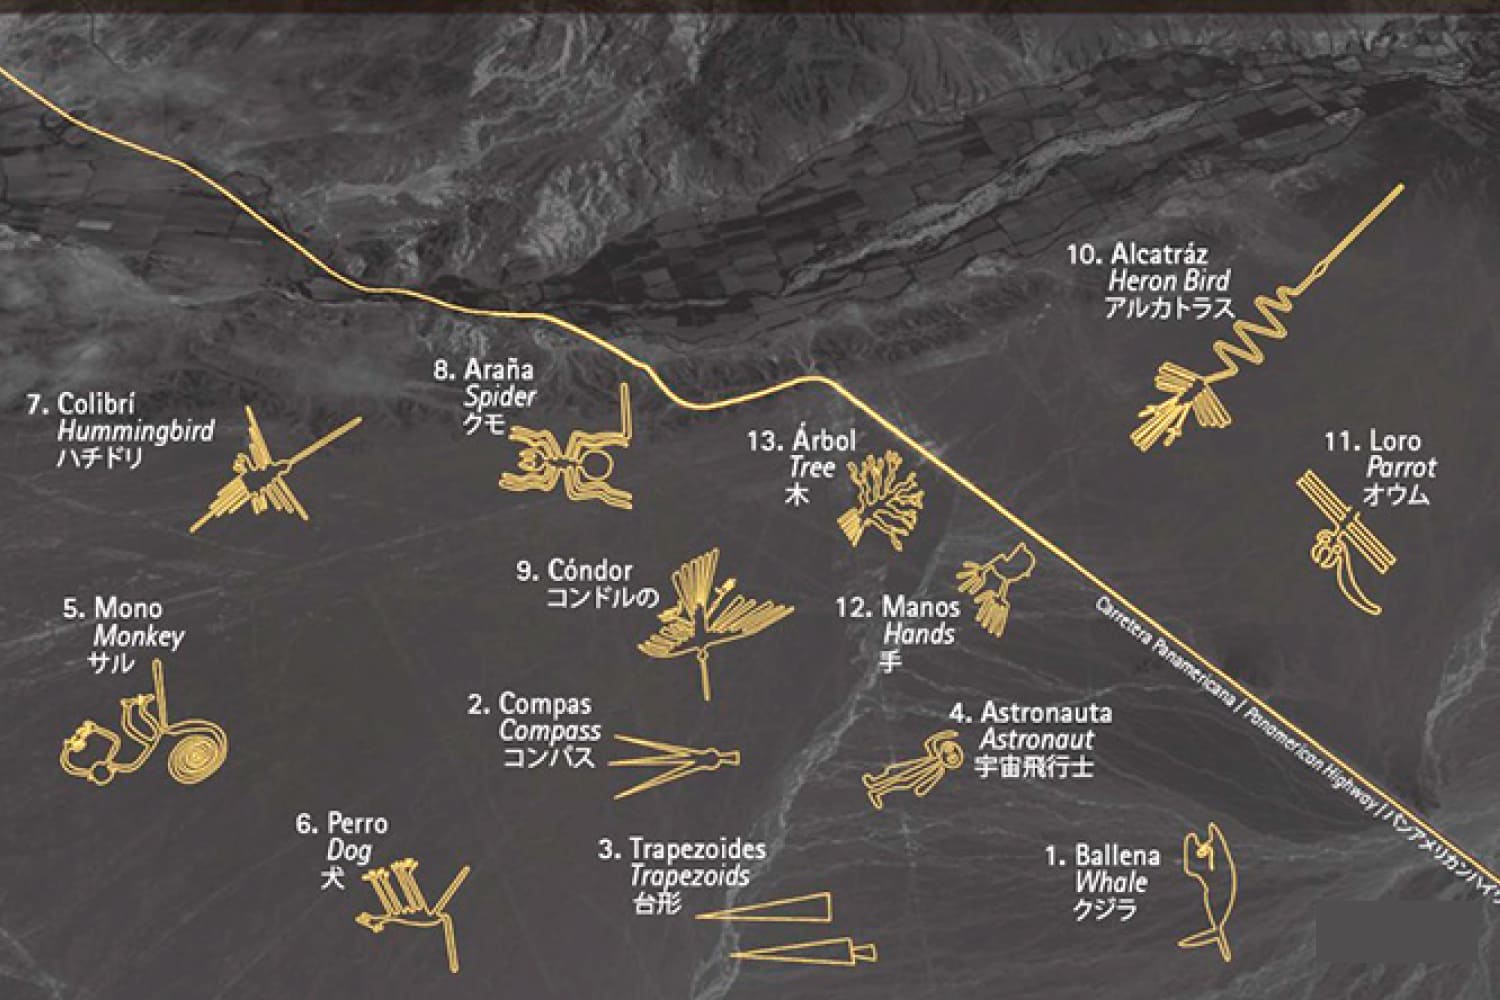 MEANING OF THE NAZCA LINES